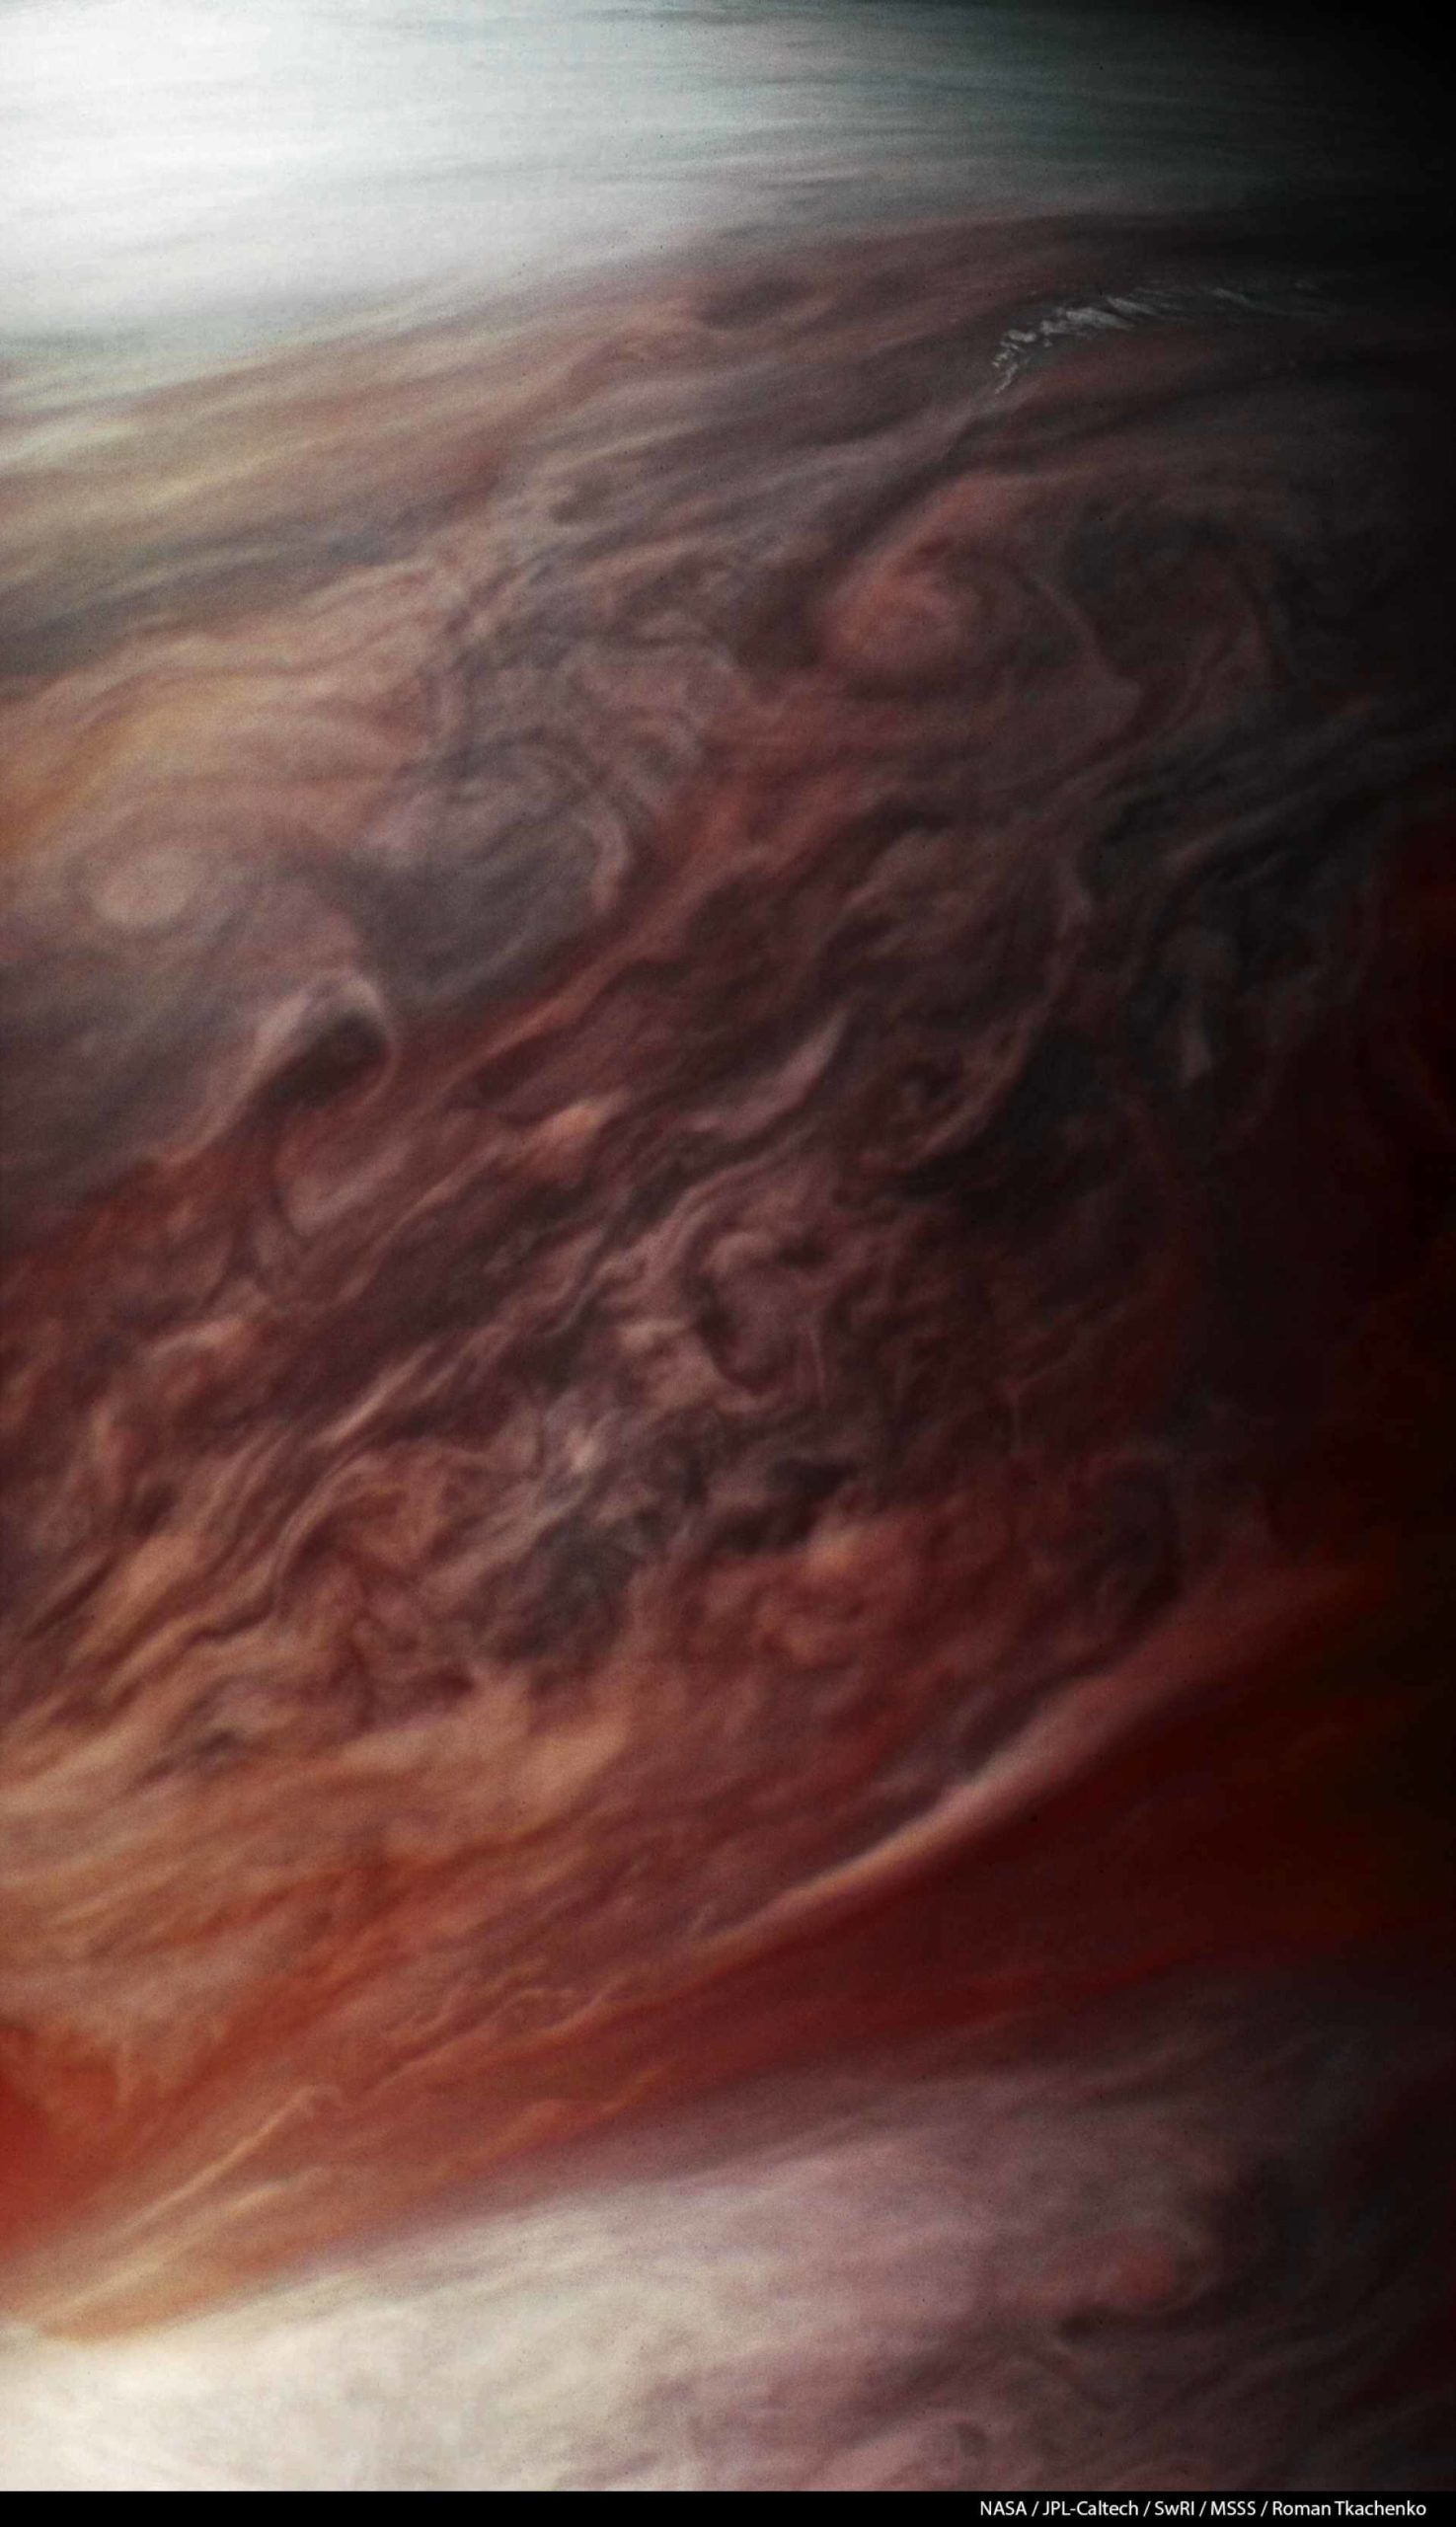 Let Glorious Jupiter Distract You From Existential Dread